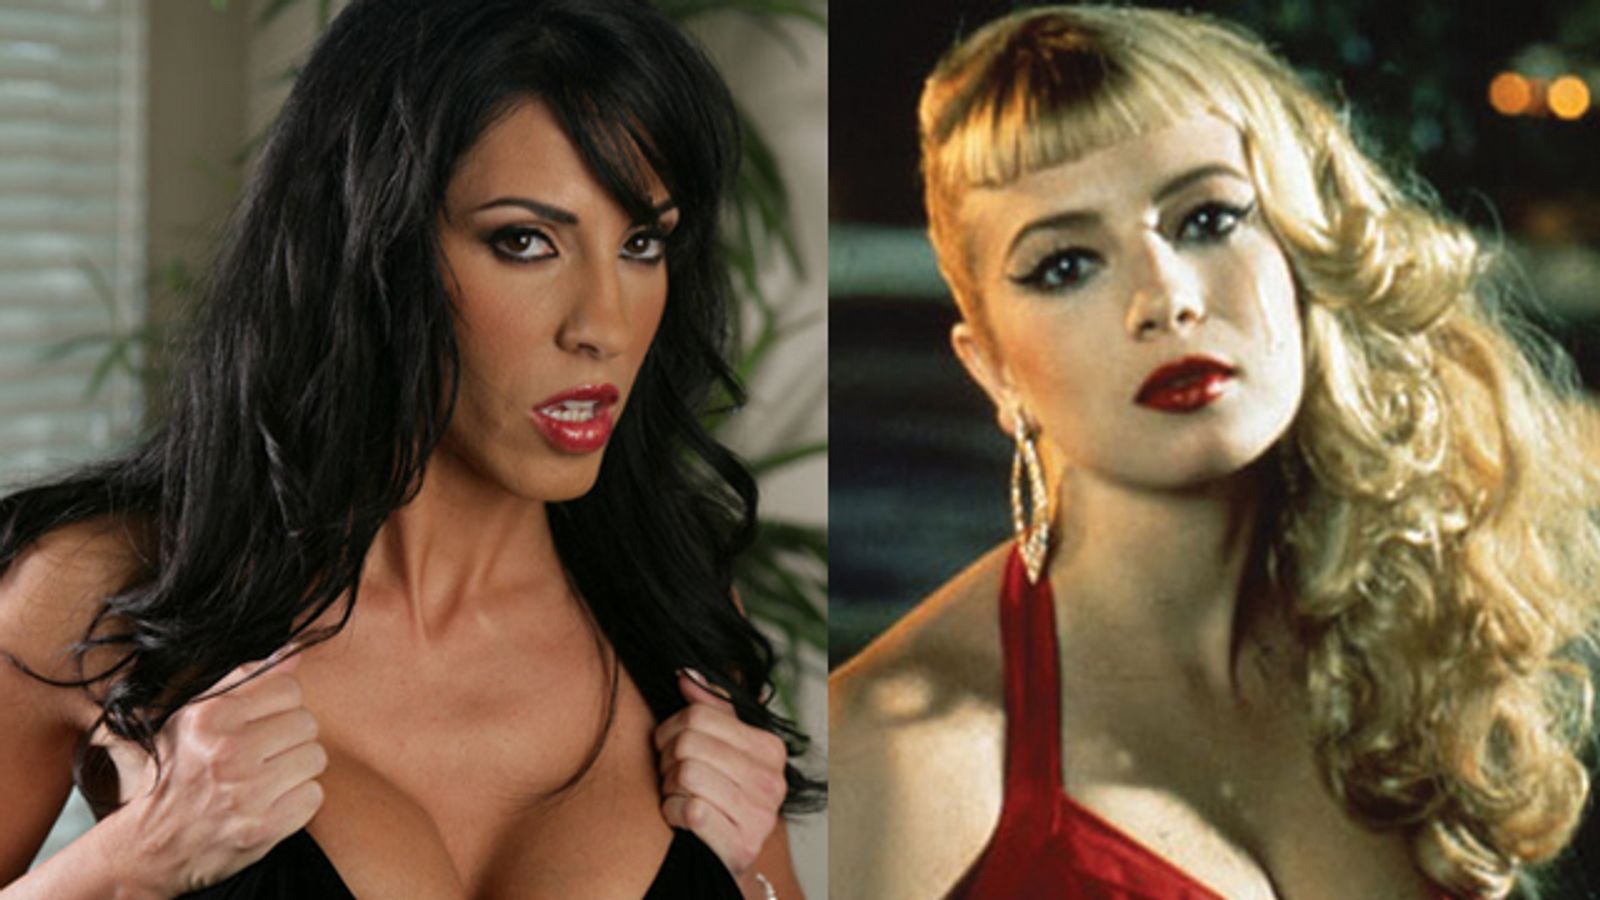 Veronica Rayne, Traci Lords to Serve Beer in Hell